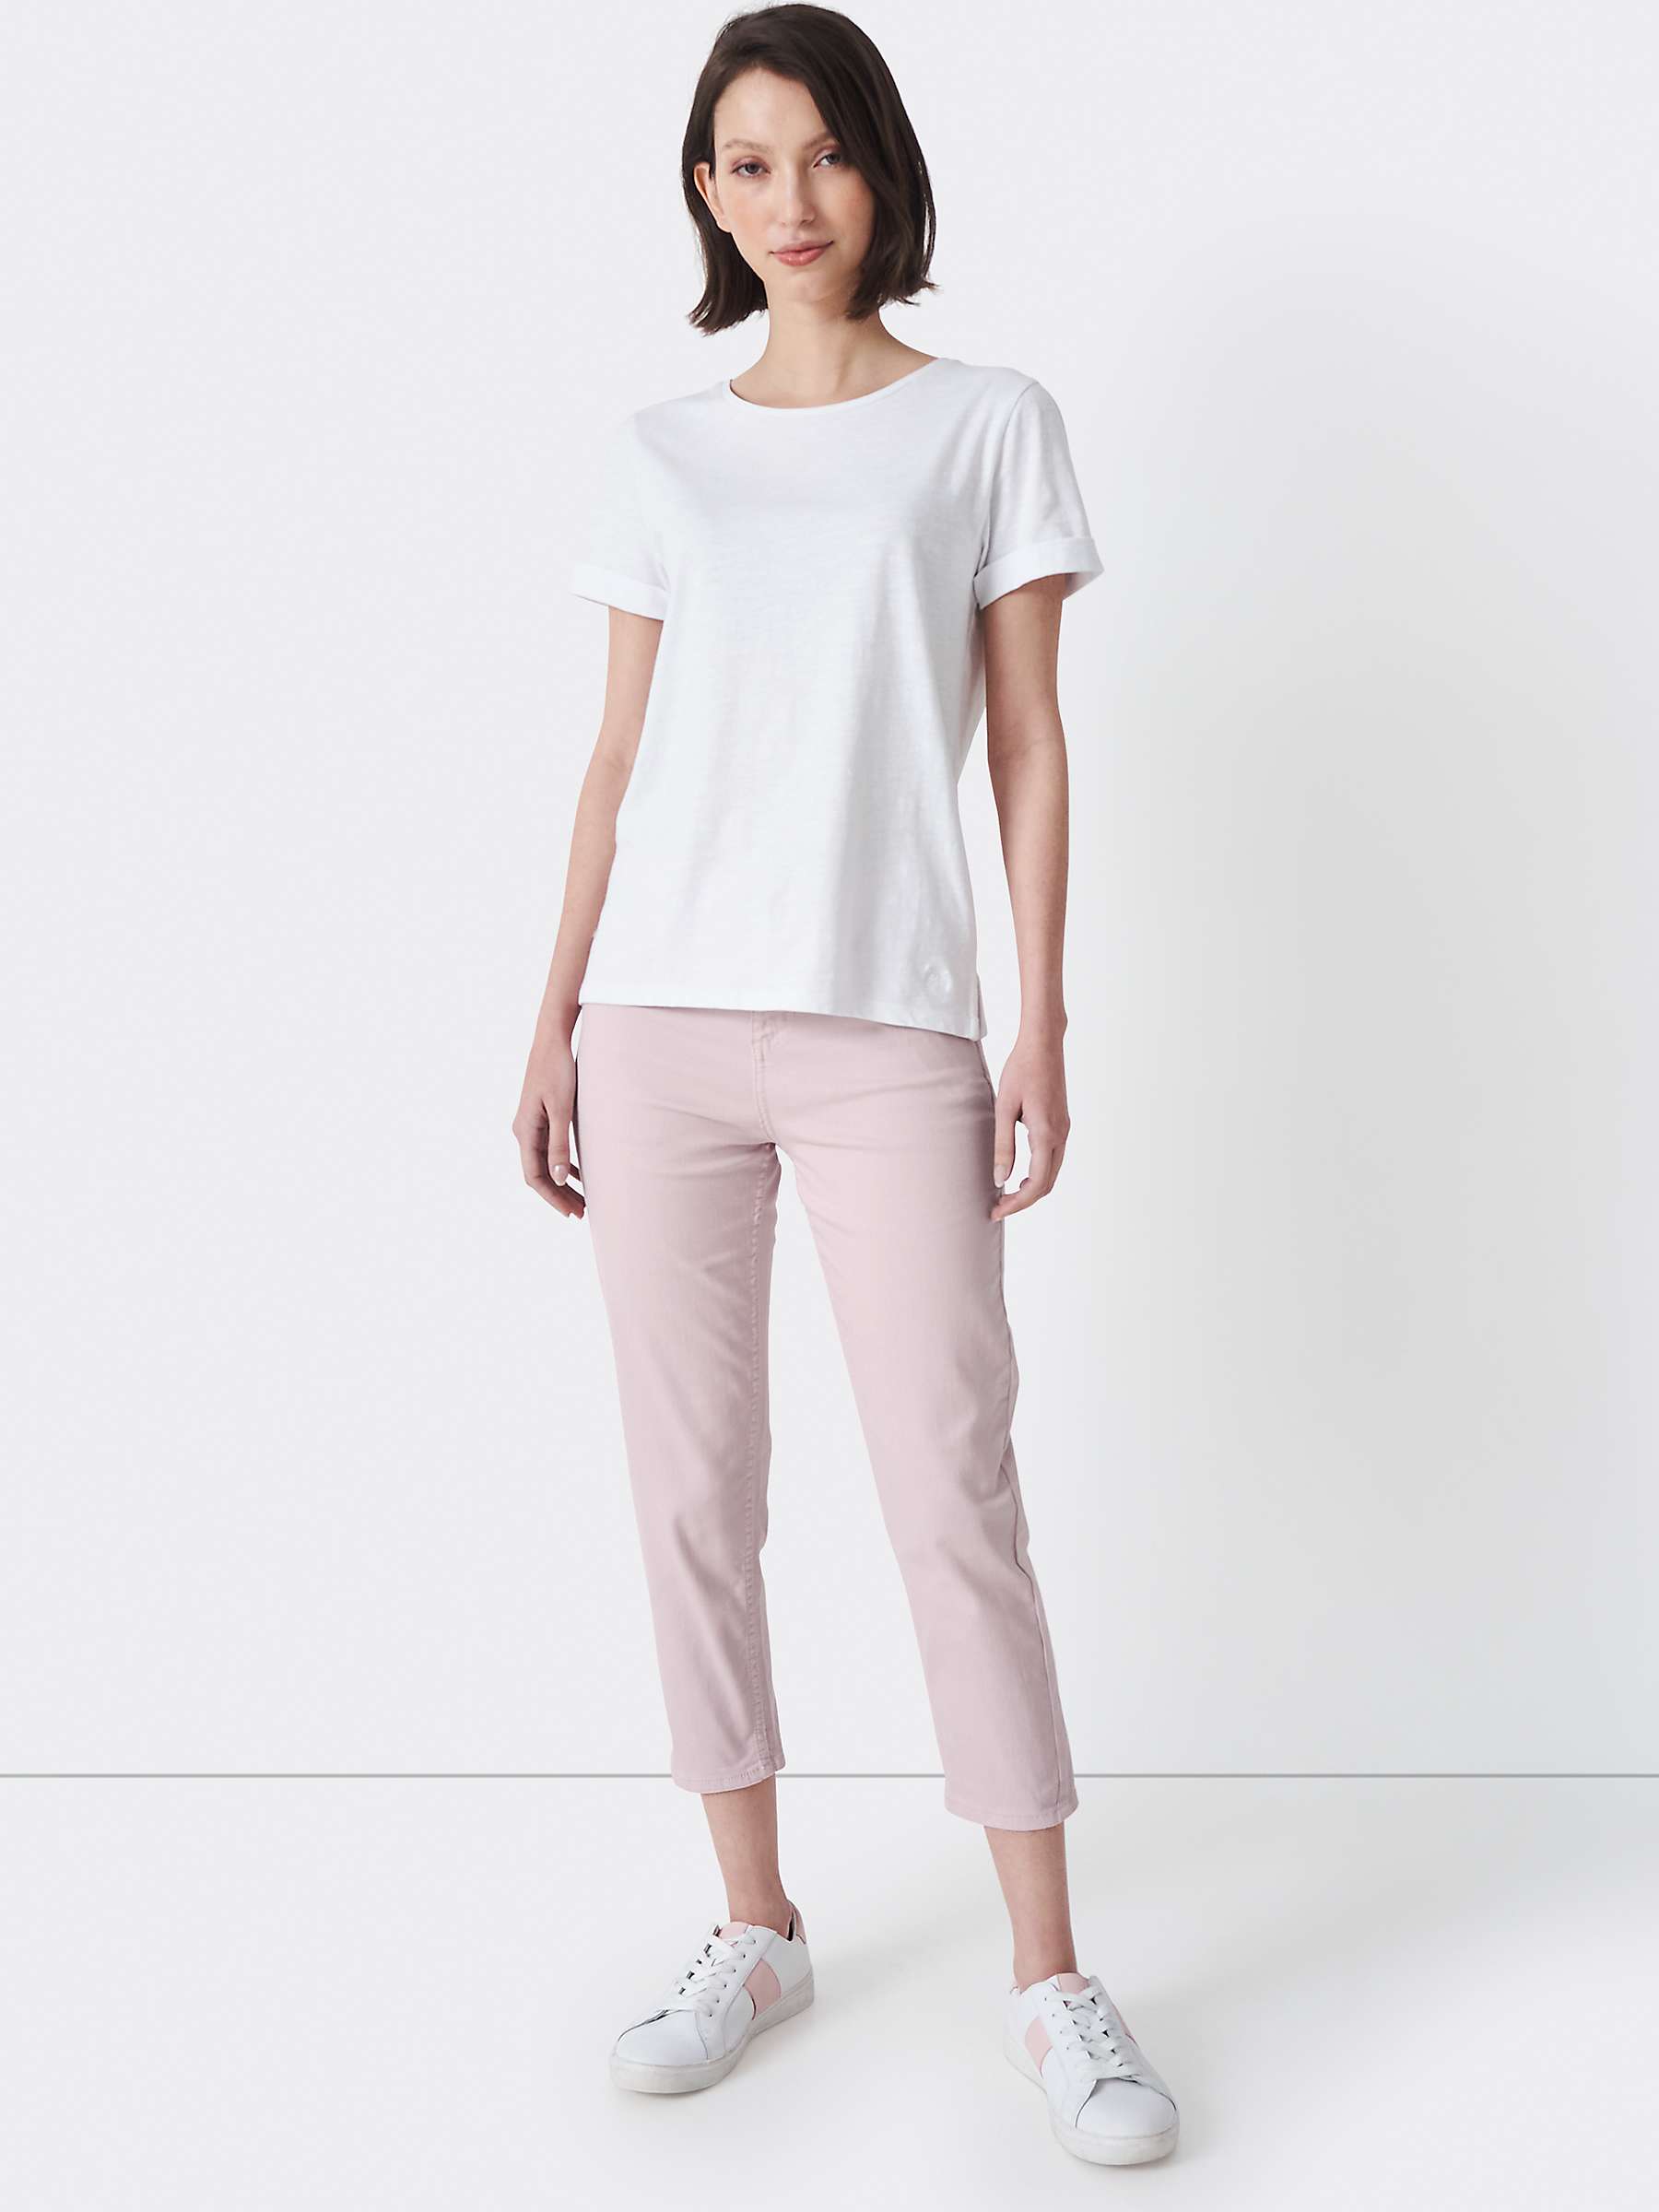 Buy Crew Clothing Cropped Skinny Jeans Online at johnlewis.com